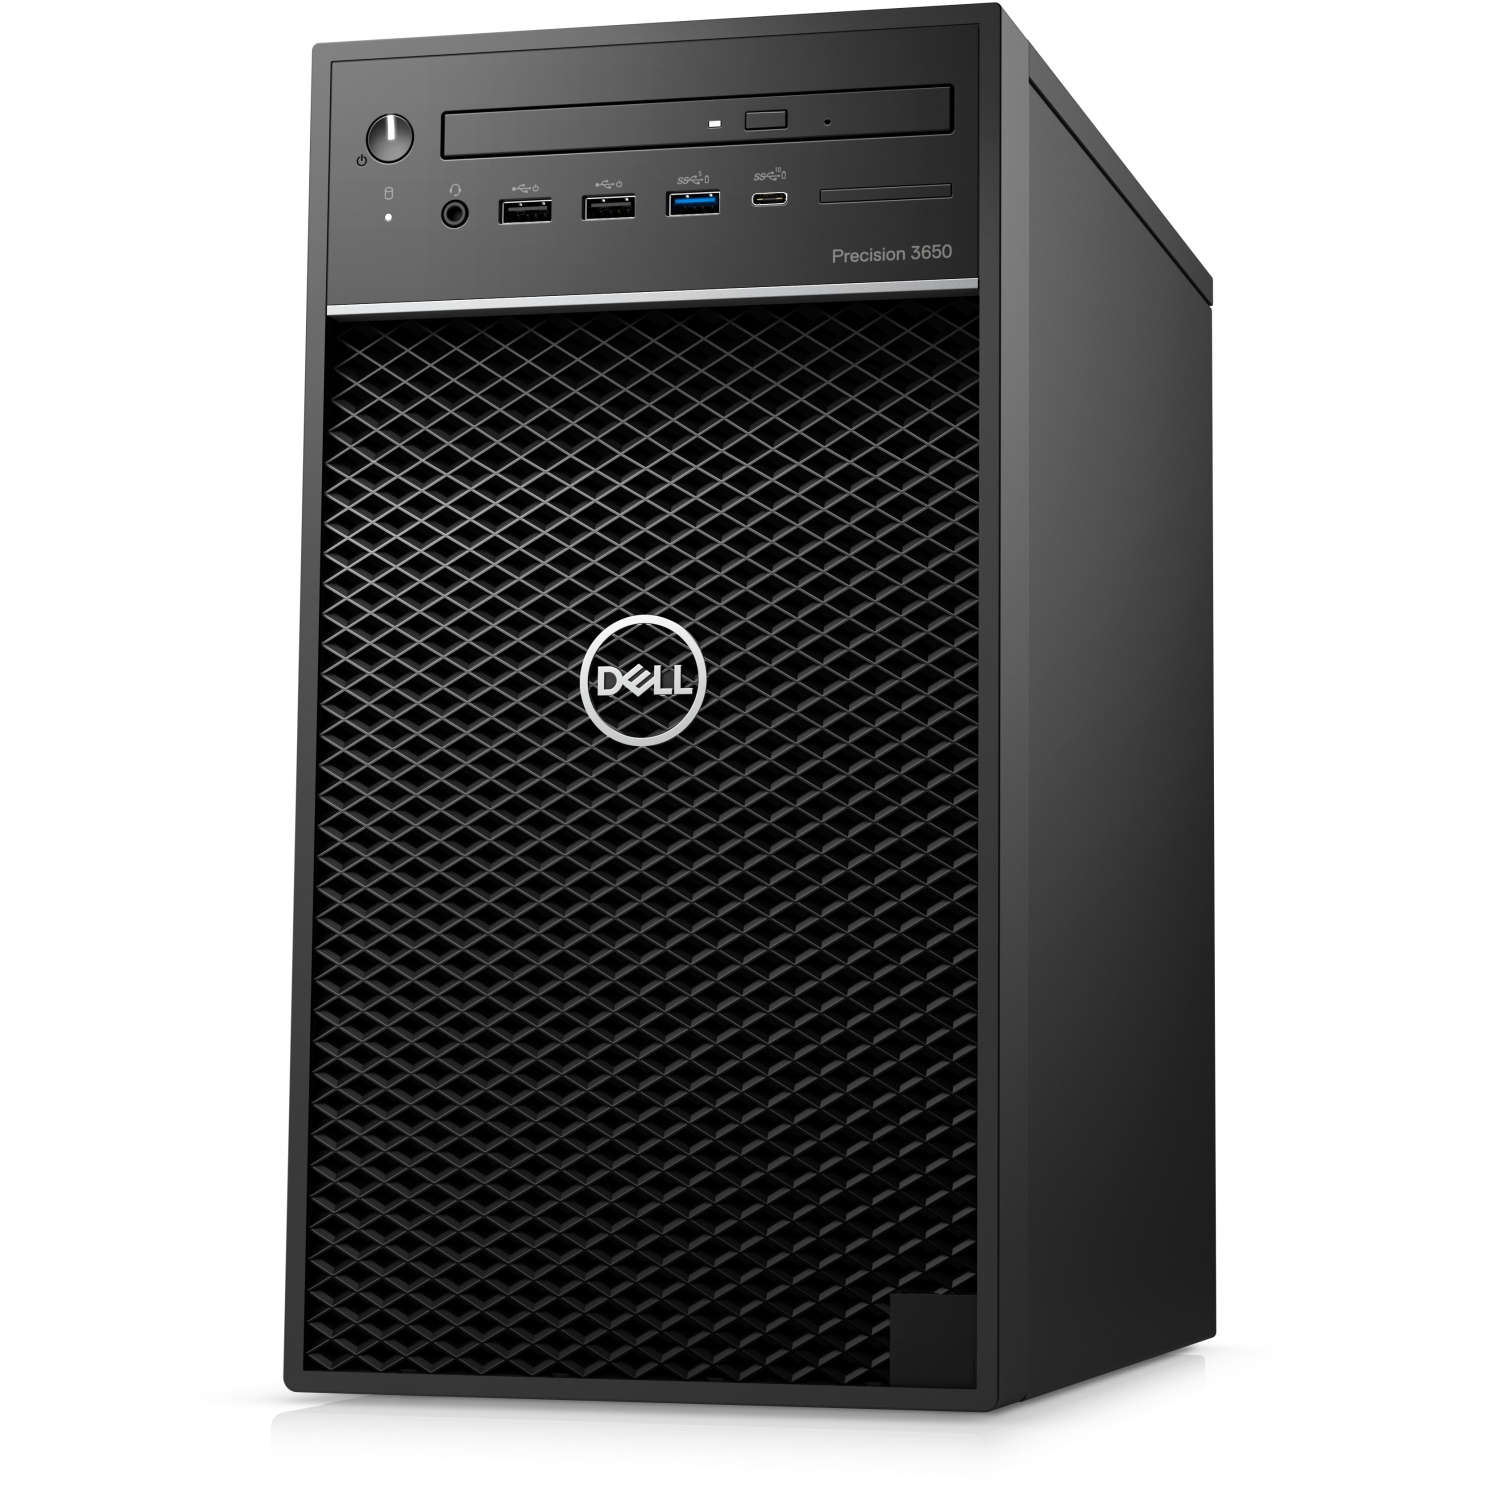 Refurbished (Excellent) - Dell Precision T3650 Workstation Desktop (2021), Core i9, 1TB SSD + 512GB SSD, 32GB RAM, 8 Cores @ 5.3 GHz, 11th Gen CPU Certified Refurbished